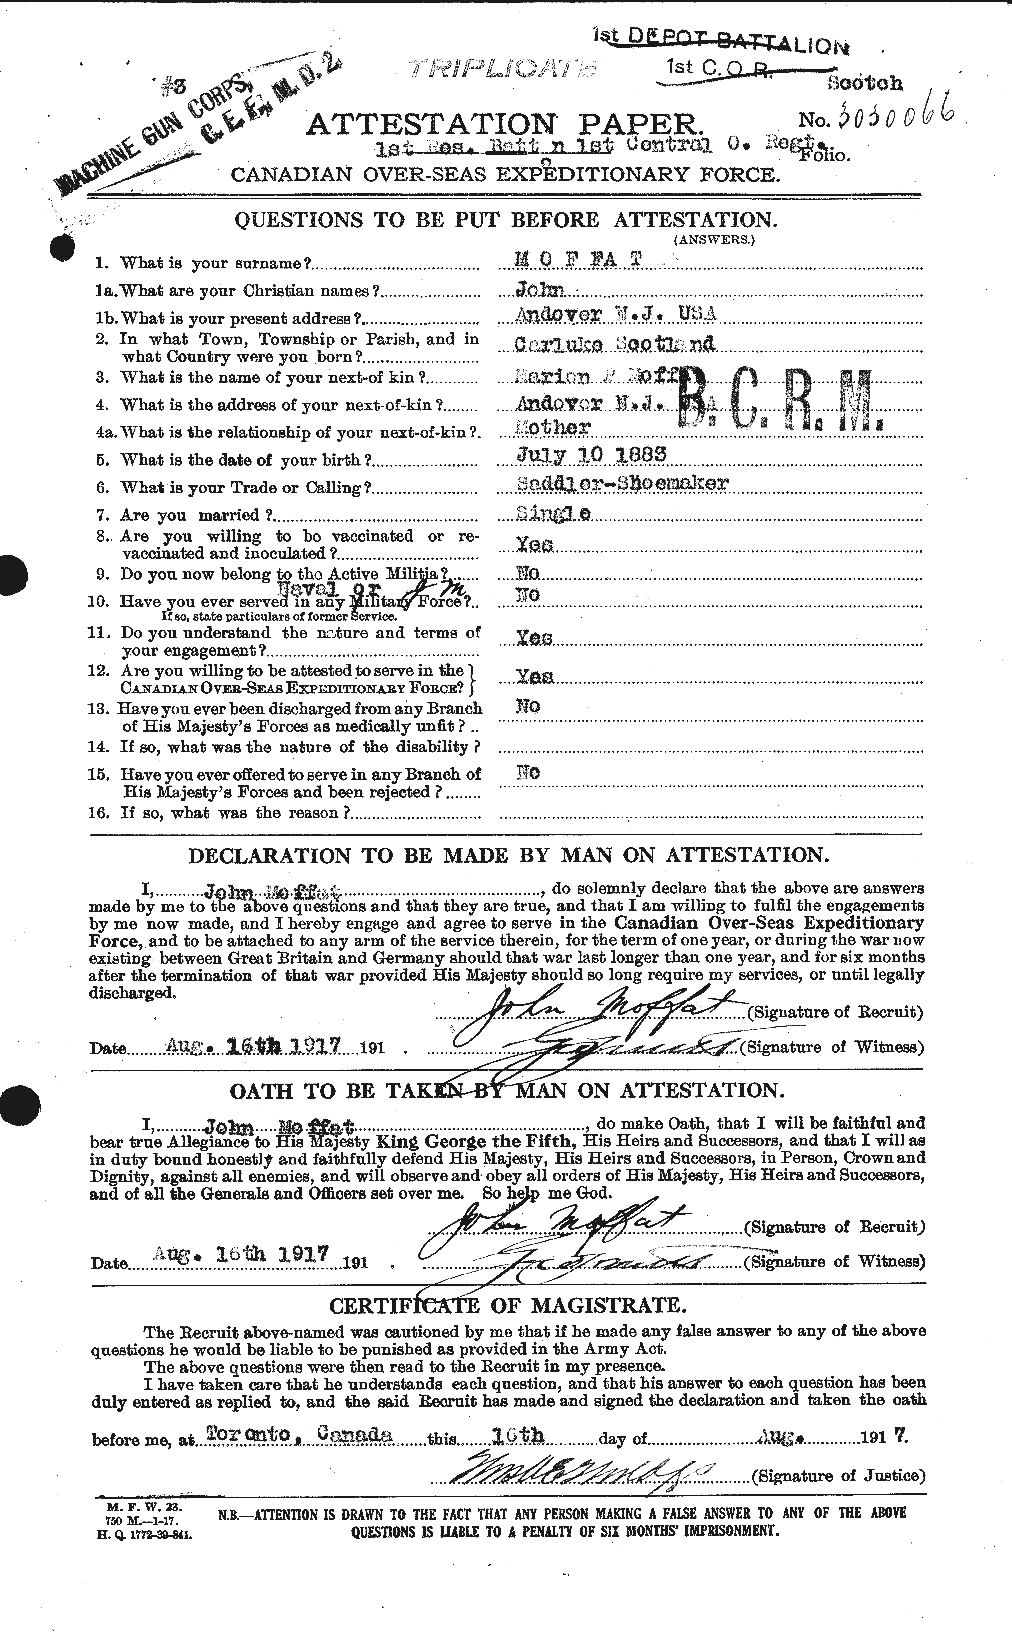 Personnel Records of the First World War - CEF 499042a